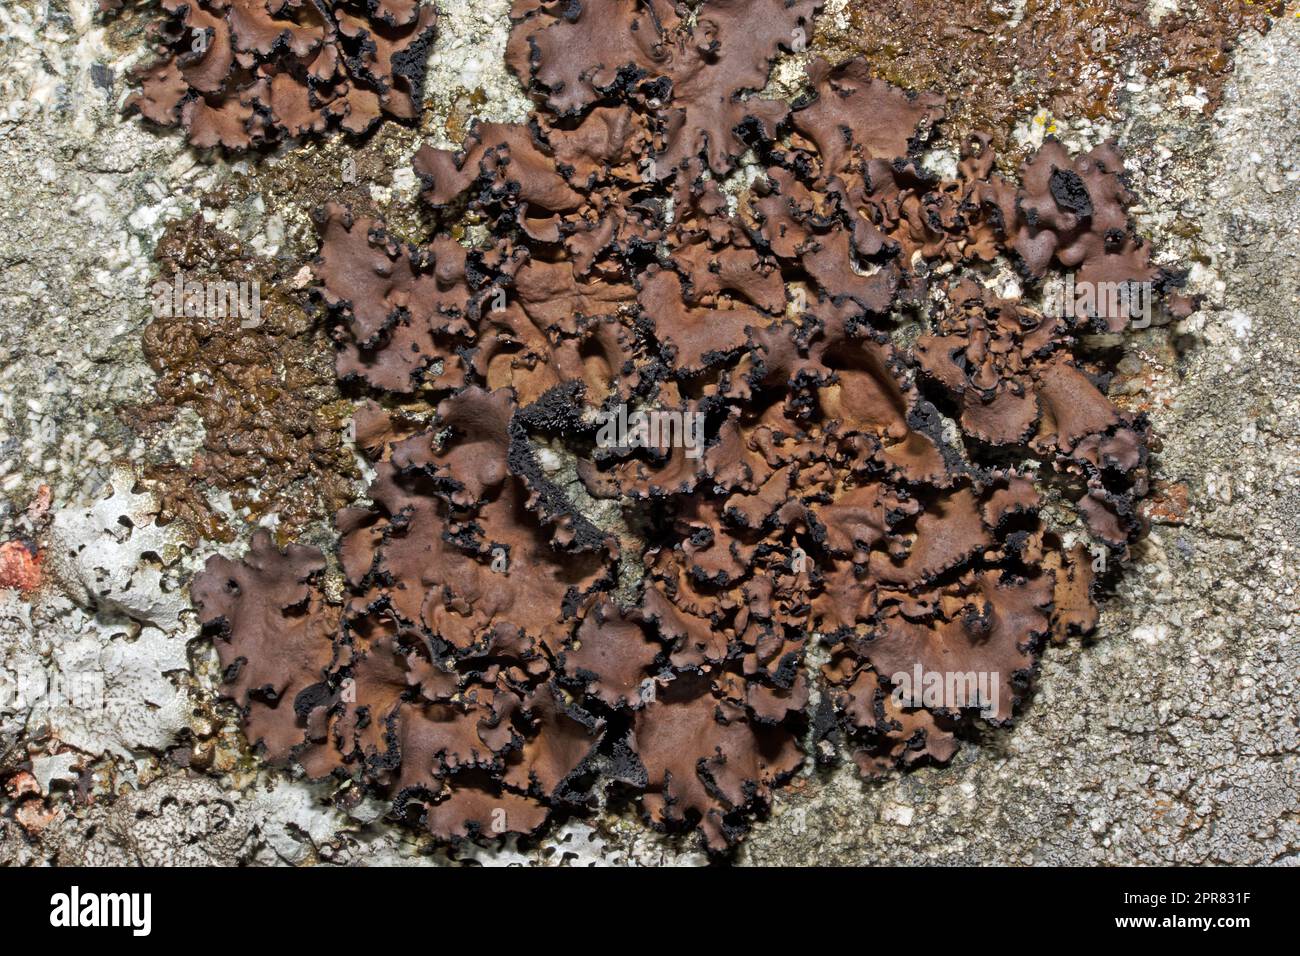 Umbilicaria polyrrhiza is a foliose lichen found on exposed siliceous rocks  in hills and mountains. It occurs in Europe, Asia and North America. Stock Photo